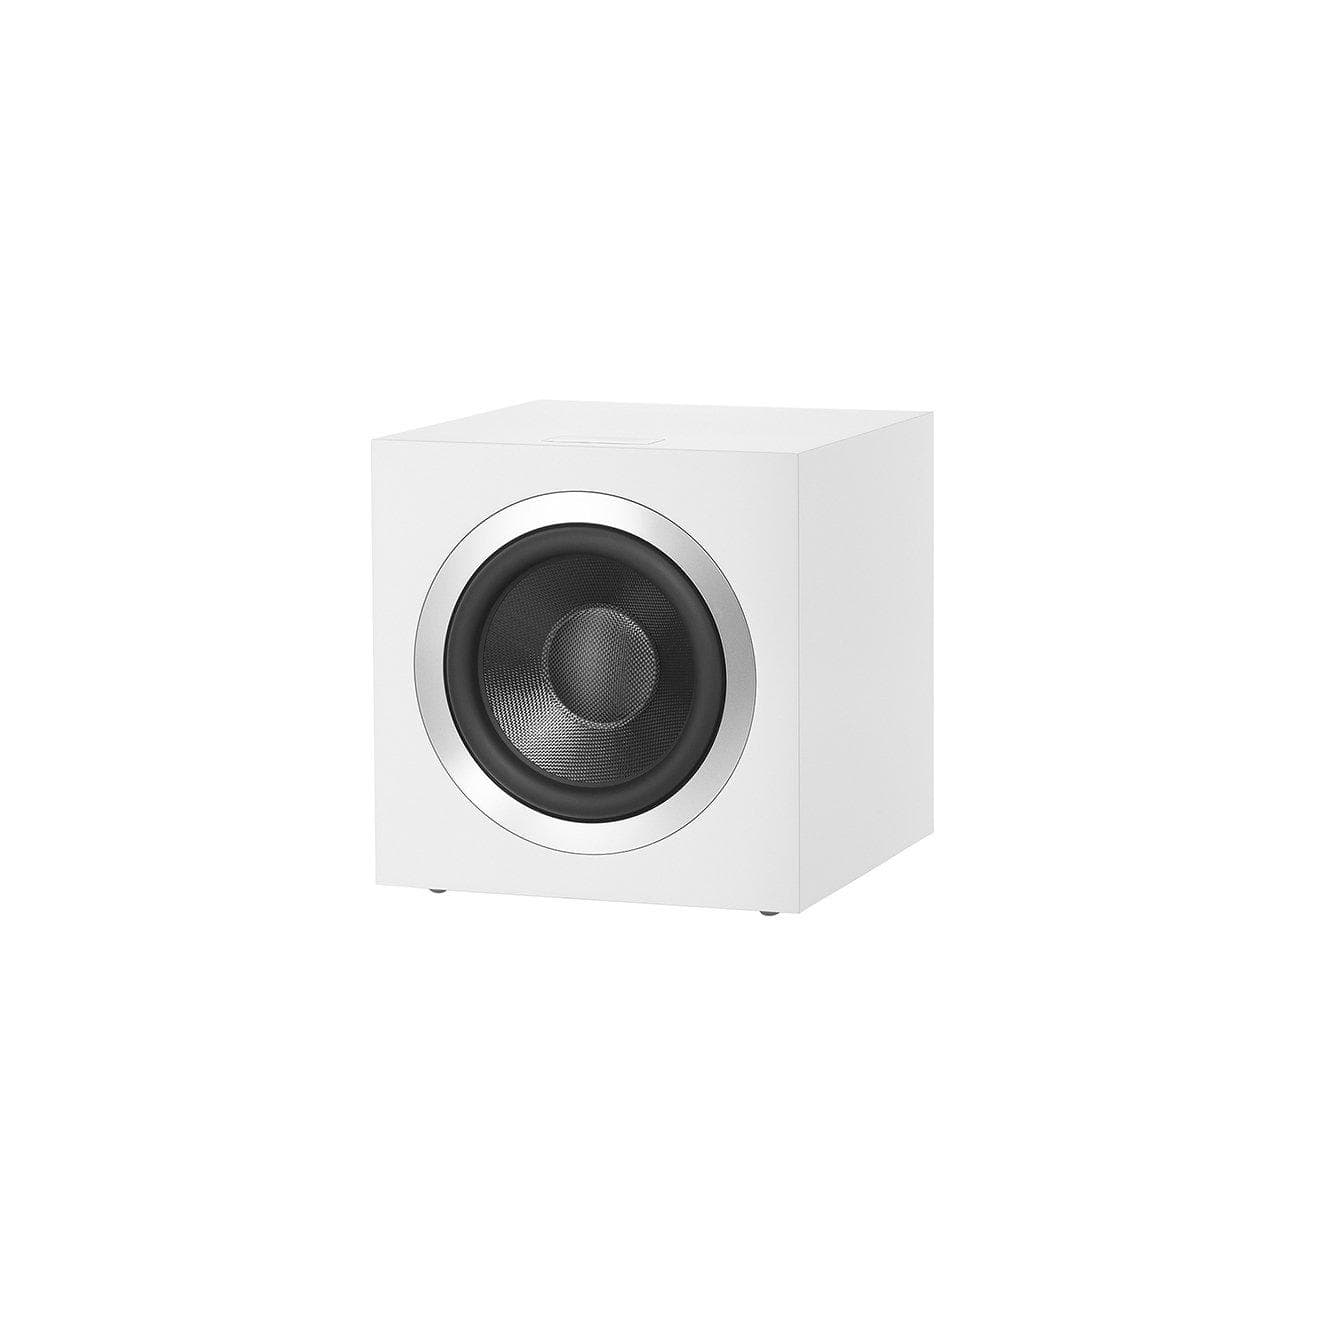 Bowers & Wilkins Subwoofers B&W DB4S 10-Inch 1000W Subwoofer - Satin White